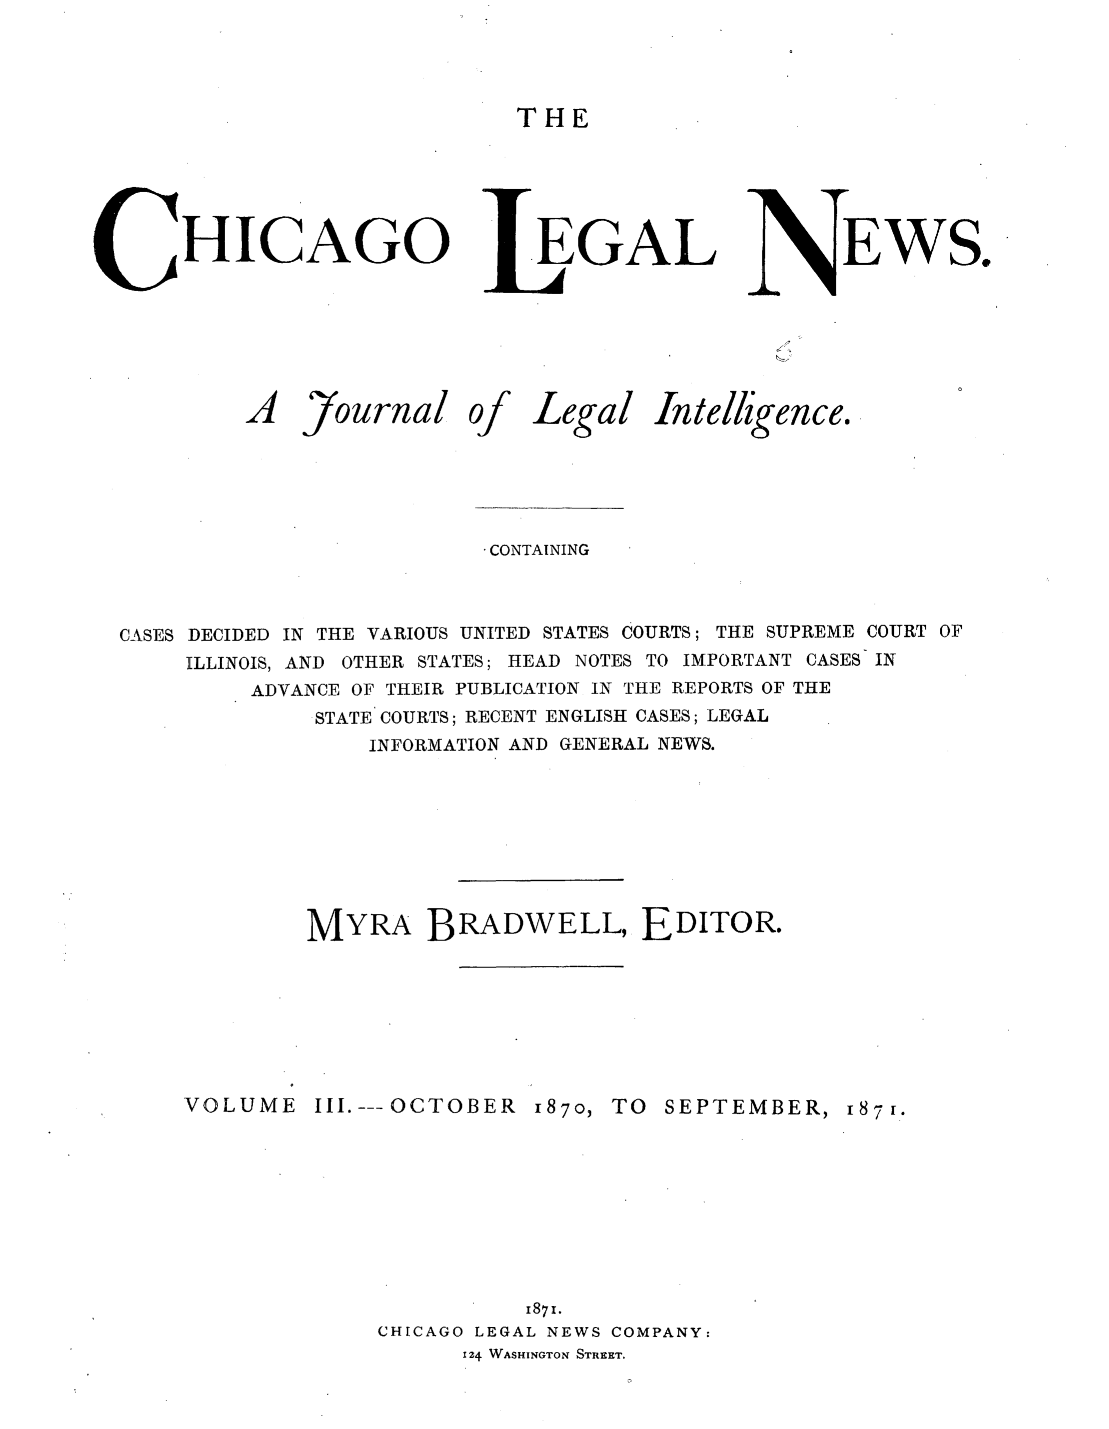 handle is hein.journals/chiclene3 and id is 1 raw text is: THEHICAGOA7ournalOf.EGALLegal InteEWS.iligence.CONTAININGCASES DECIDED IN THE VARIOUS UNITED STATES COURTS; THE SUPREME COURT OFILLINOIS, AND OTHER STATES; HEAD NOTES TO IMPORTANT CASES INADVANCE OF THEIR PUBLICATION IN THE REPORTS OF THESTATE COURTS; RECENT ENGLISH CASES; LEGALINFORMATION AND GENERAL NEWS.MYRA BRADWELL, EDITOR.VOLUME III.---OCTOBER 187O, TO SEPTEMBER, 1871.1871.CHICAGO LEGAL NEWS COMPANY:124 WASHINGTON STREET.